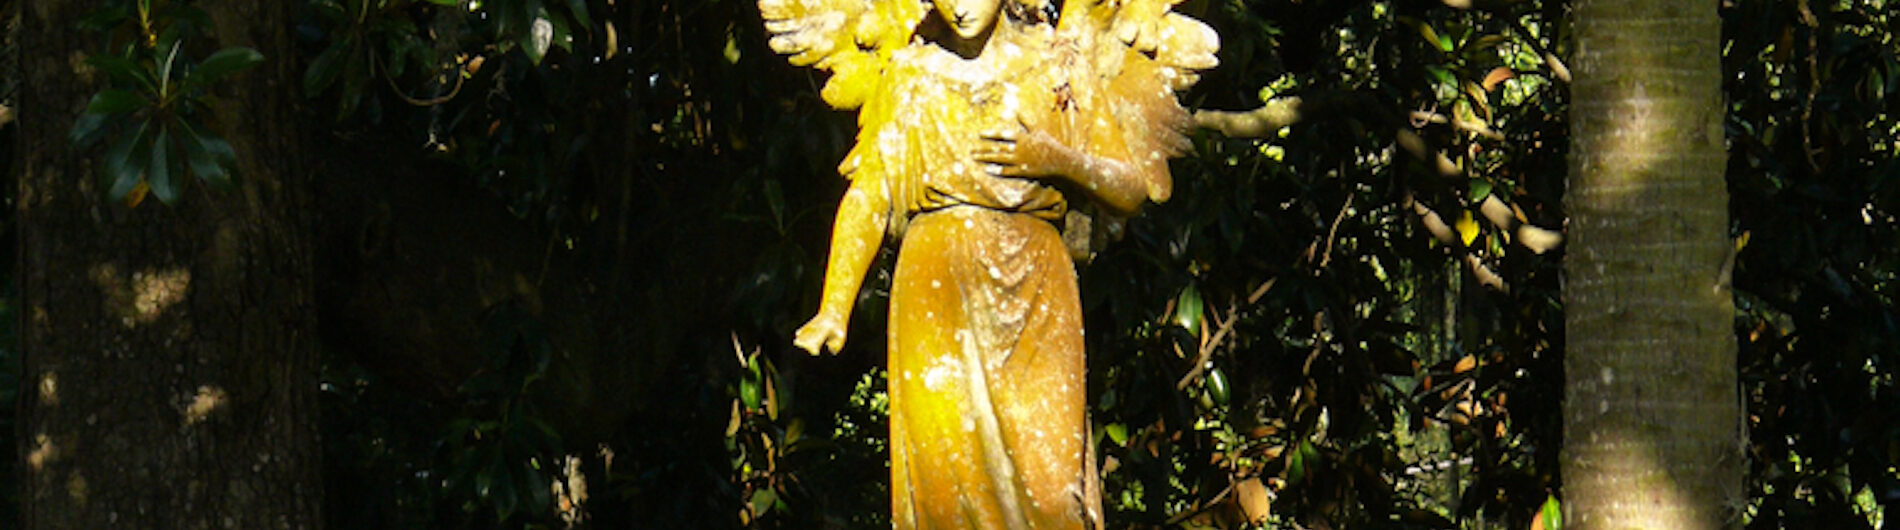 afternoon with angel statue